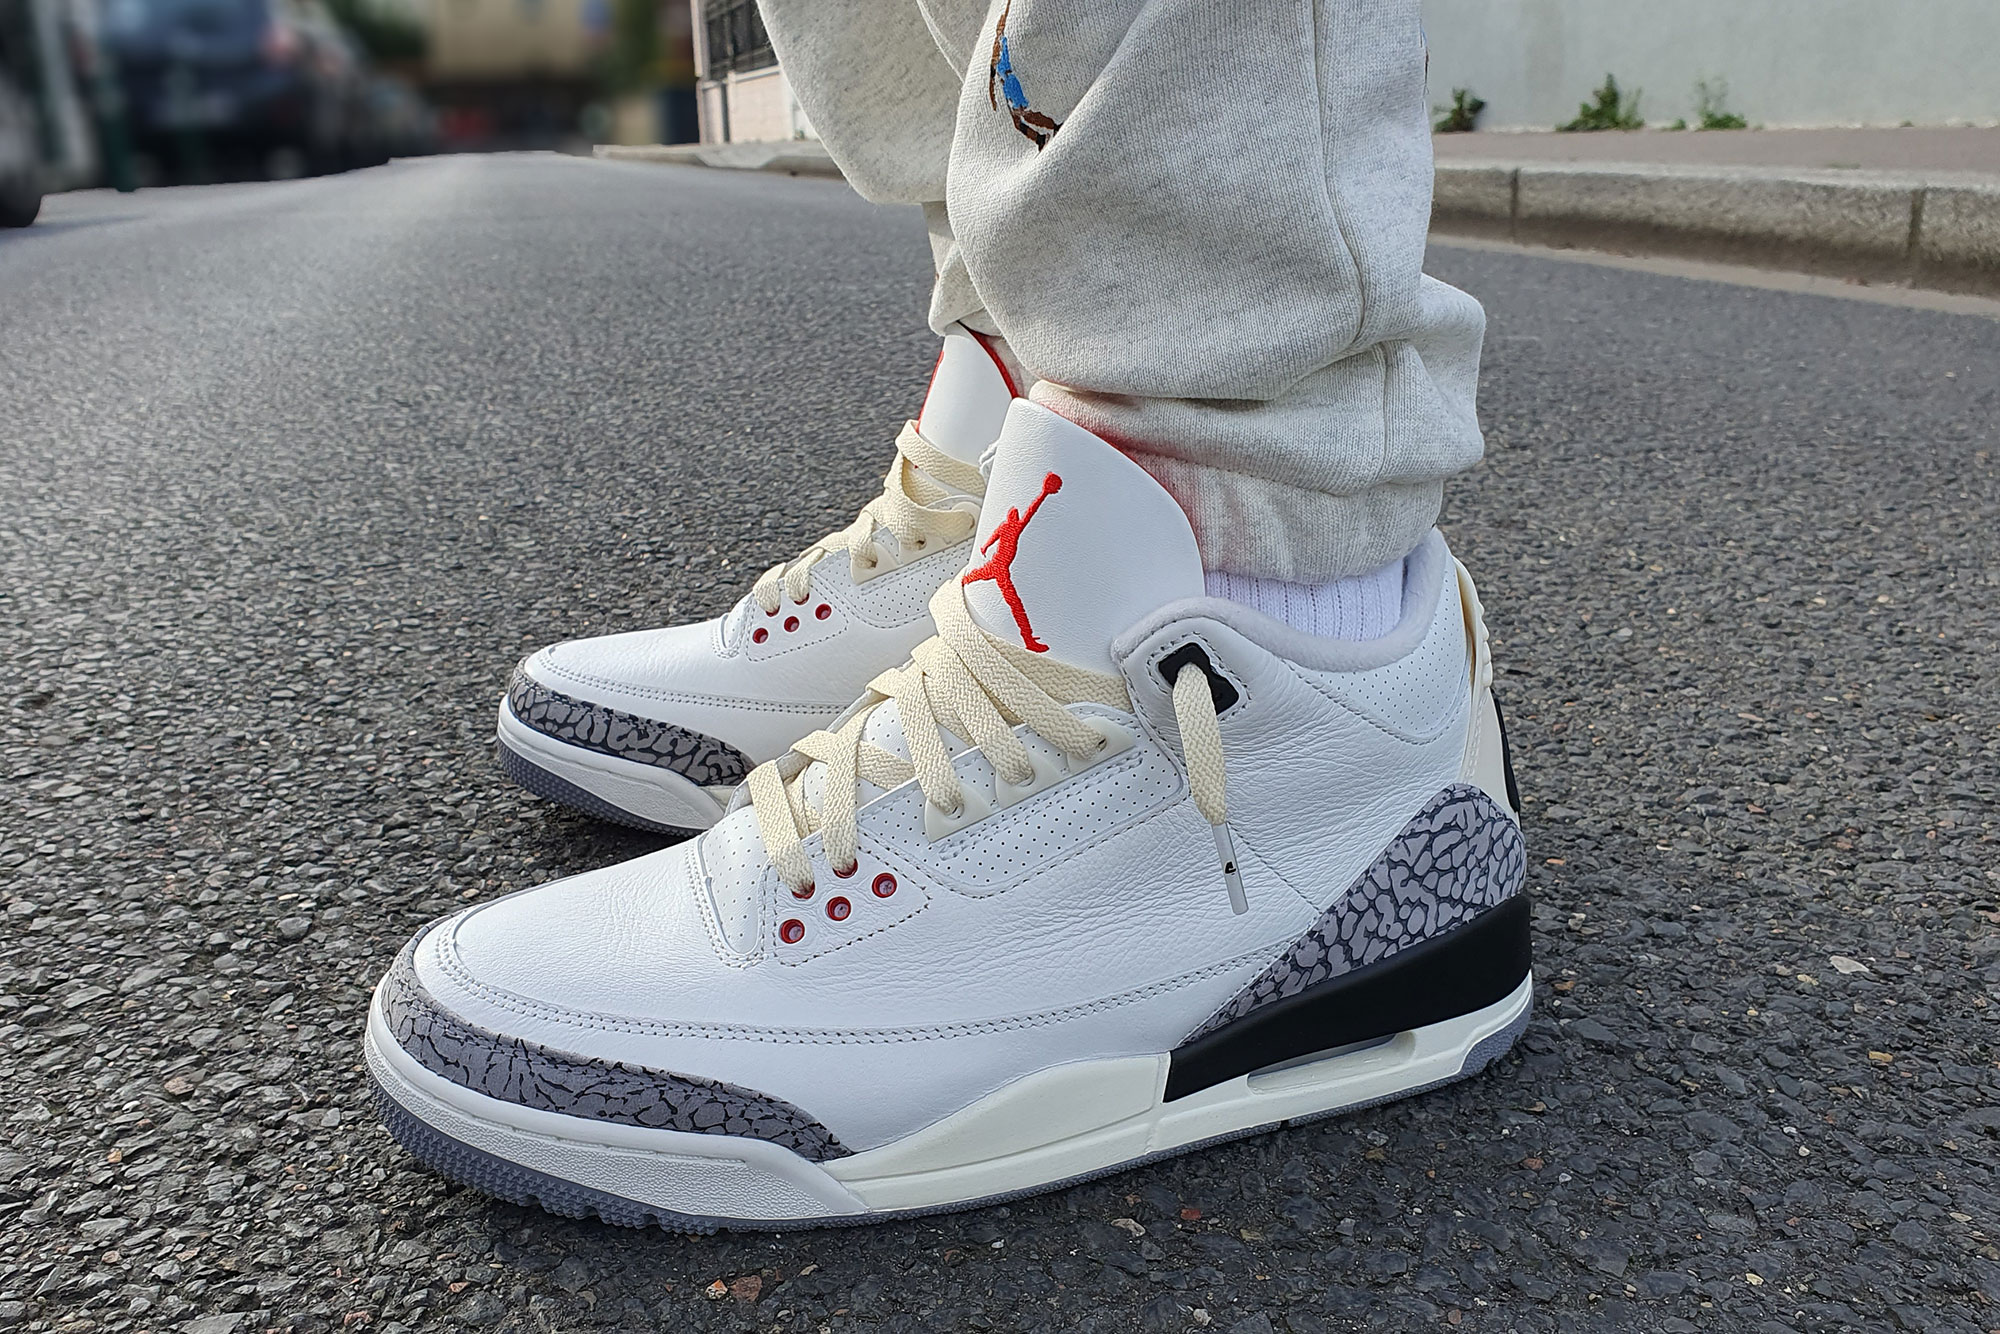 The best laces for your Jordan Retro 3 White Cement Reimagined